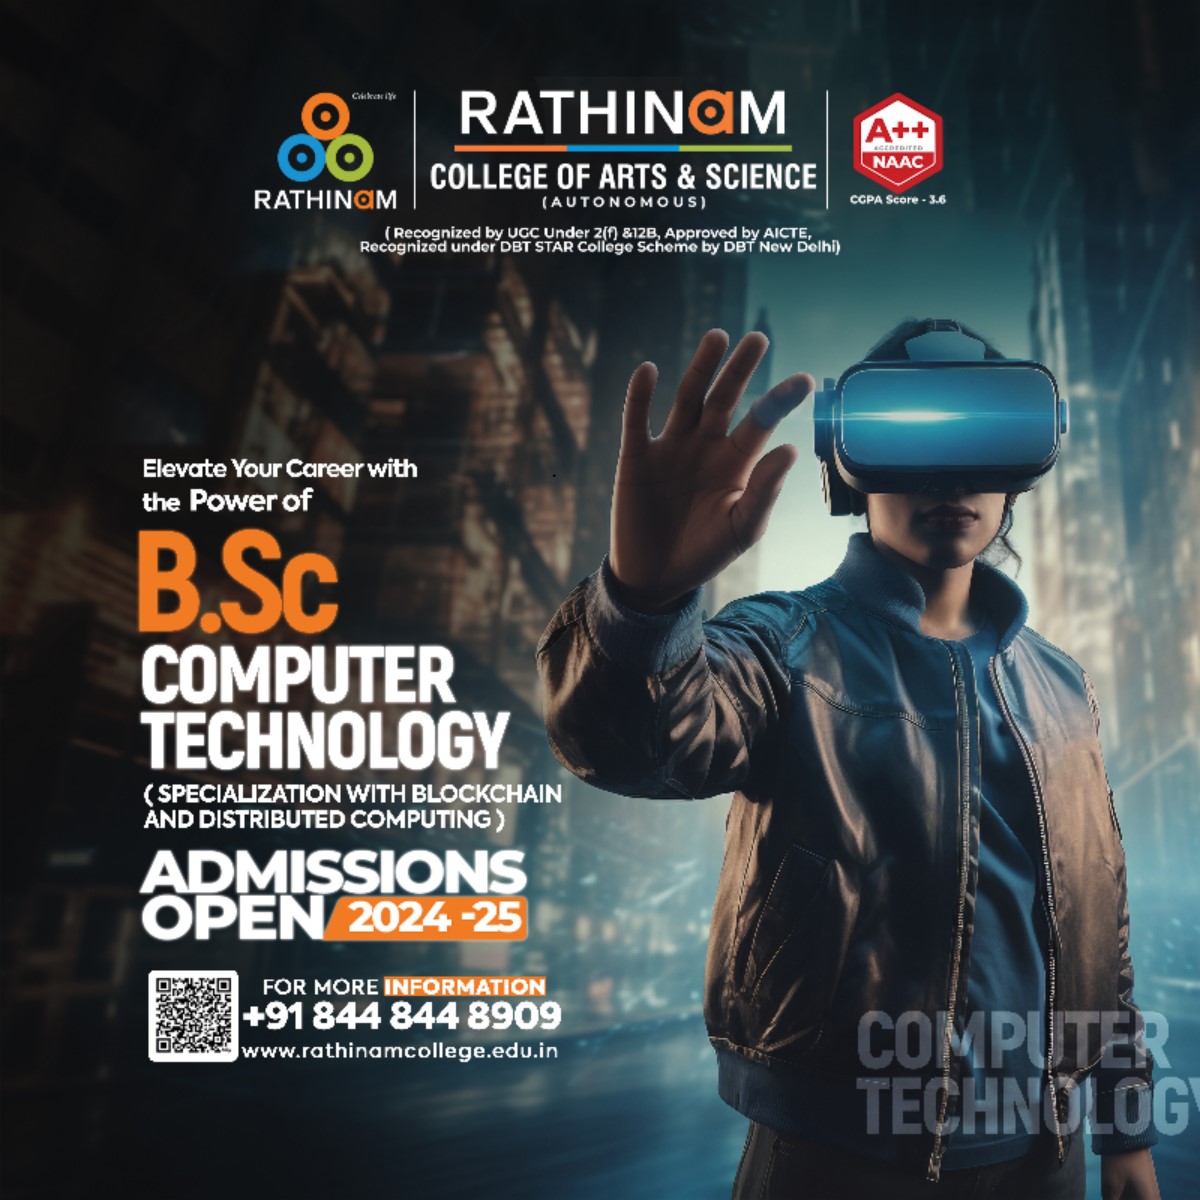 Level up your tech career with a future-proof degree! Rathinam College of Arts and Science is now offering a B.Sc in Computer Technology with a specialization in Blockchain and Distributed Computing.

#blockchain #computertechnology #education #bachelorsdegree